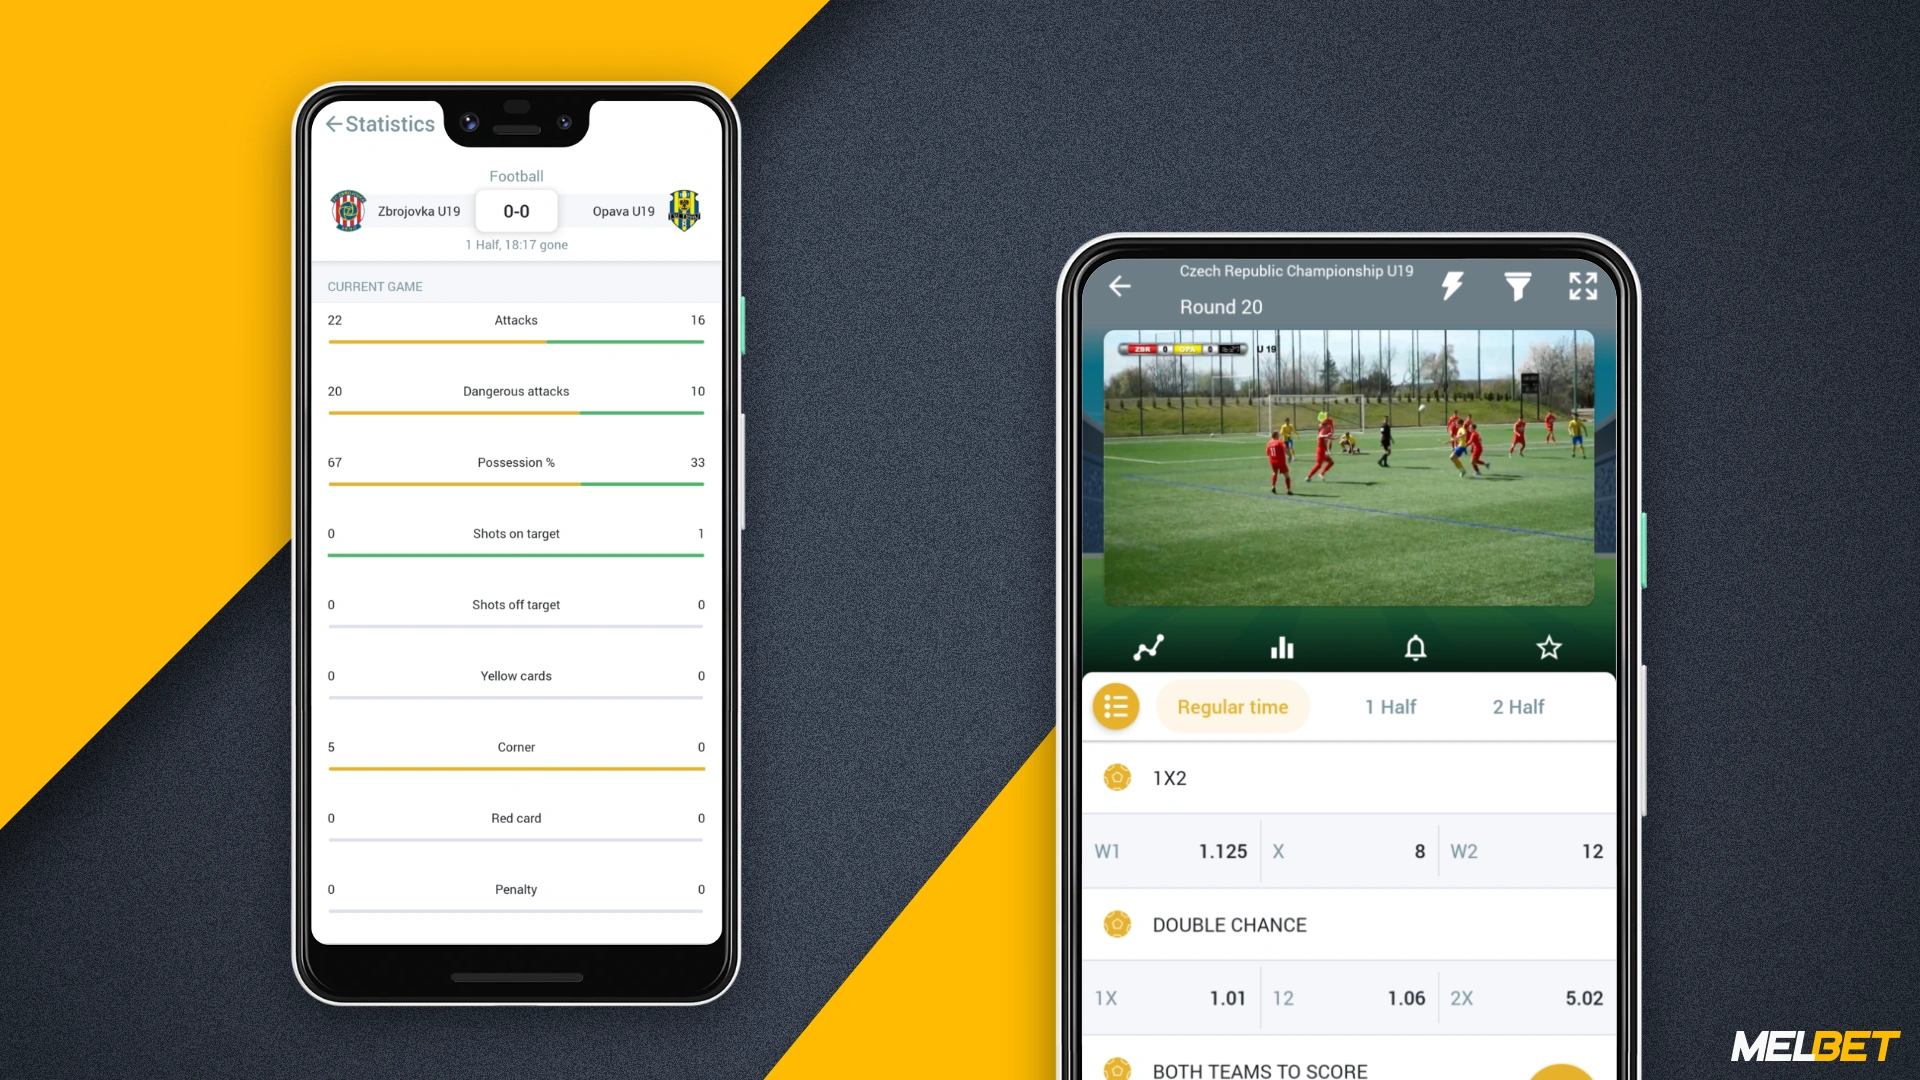 In addition to a wide range of betting options in the Melbet app, other useful functions are also available to the user, including match statistics, online broadcasting and more